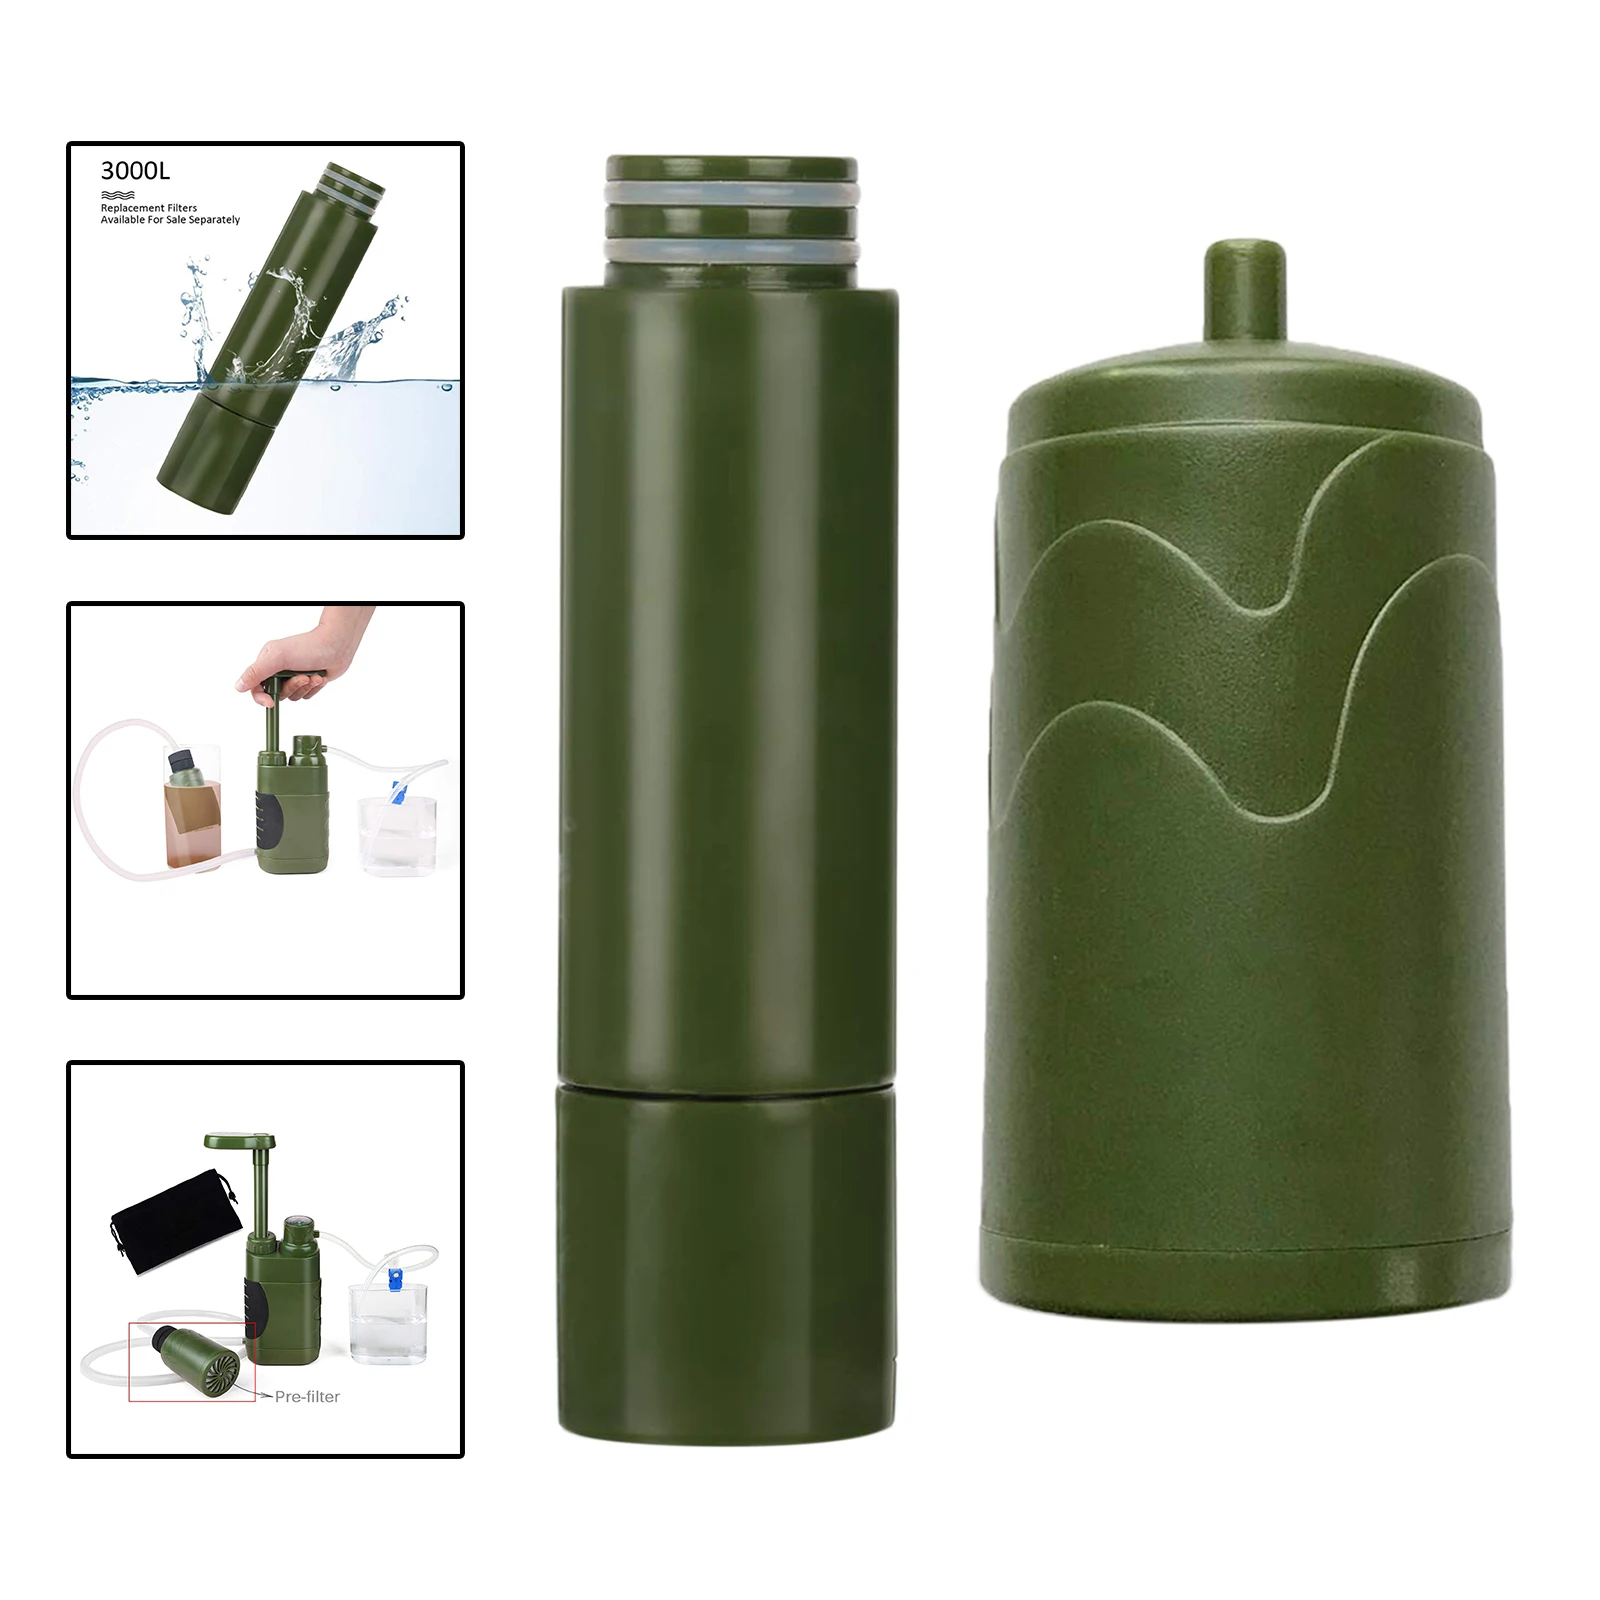 Compact Portable Pre-Filter Filter for Outdoor Personal Survival Water Purifier Filtration Hiking Travel Preparedness